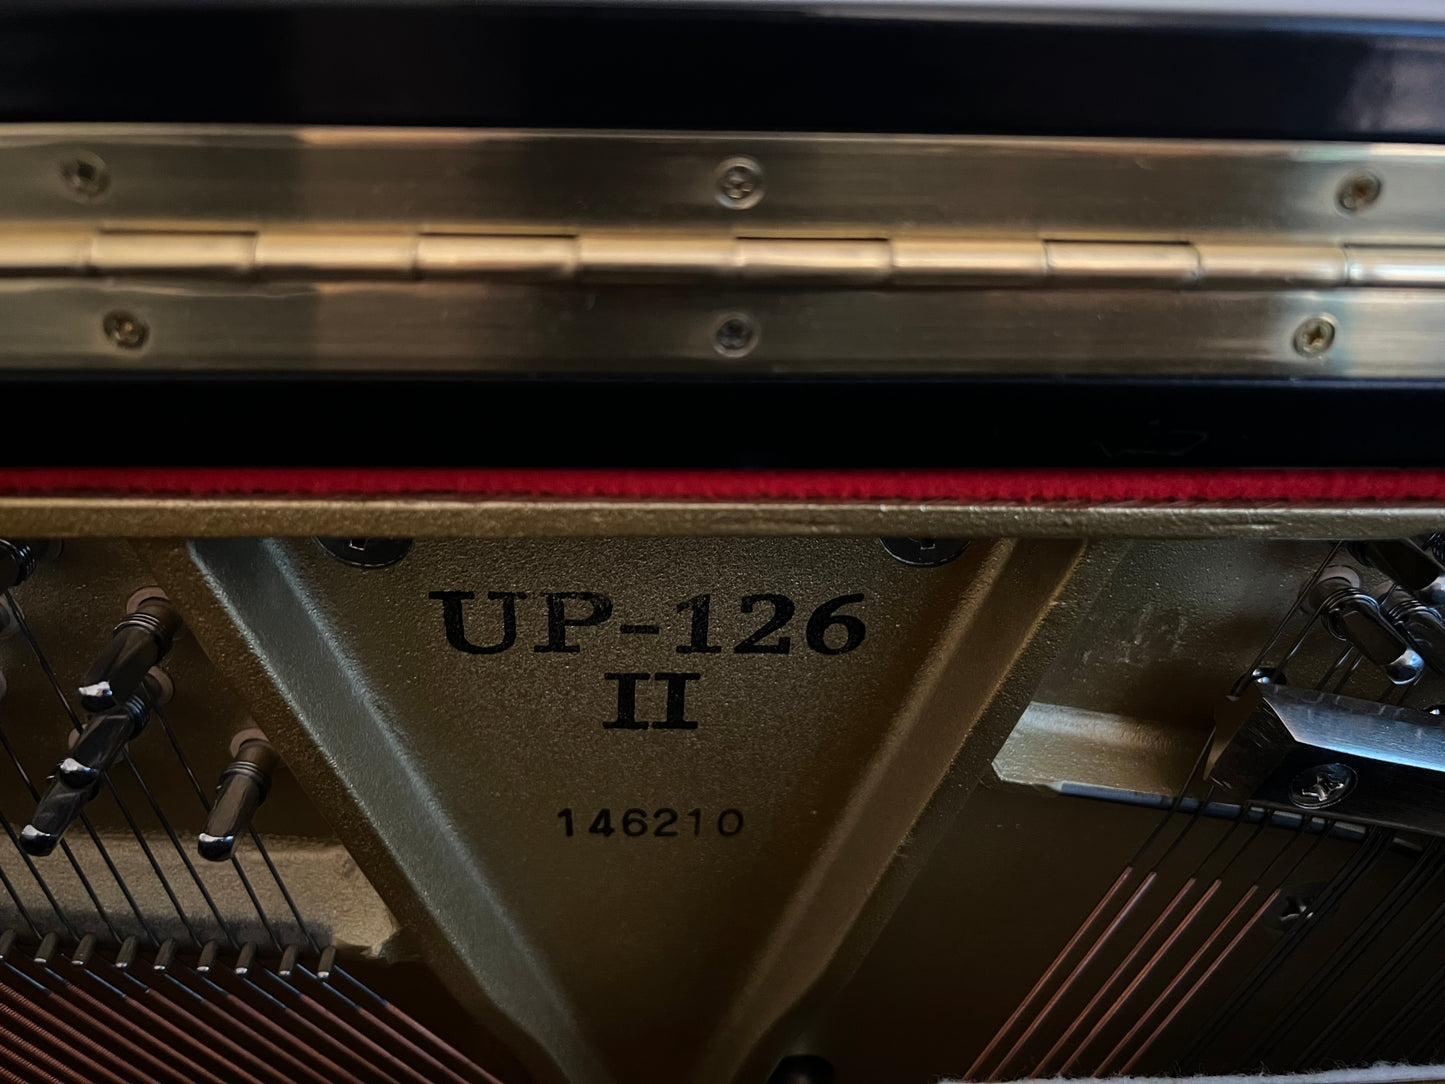 2004 Boston Upright UP-126 II | Designed by Steinway & Sons